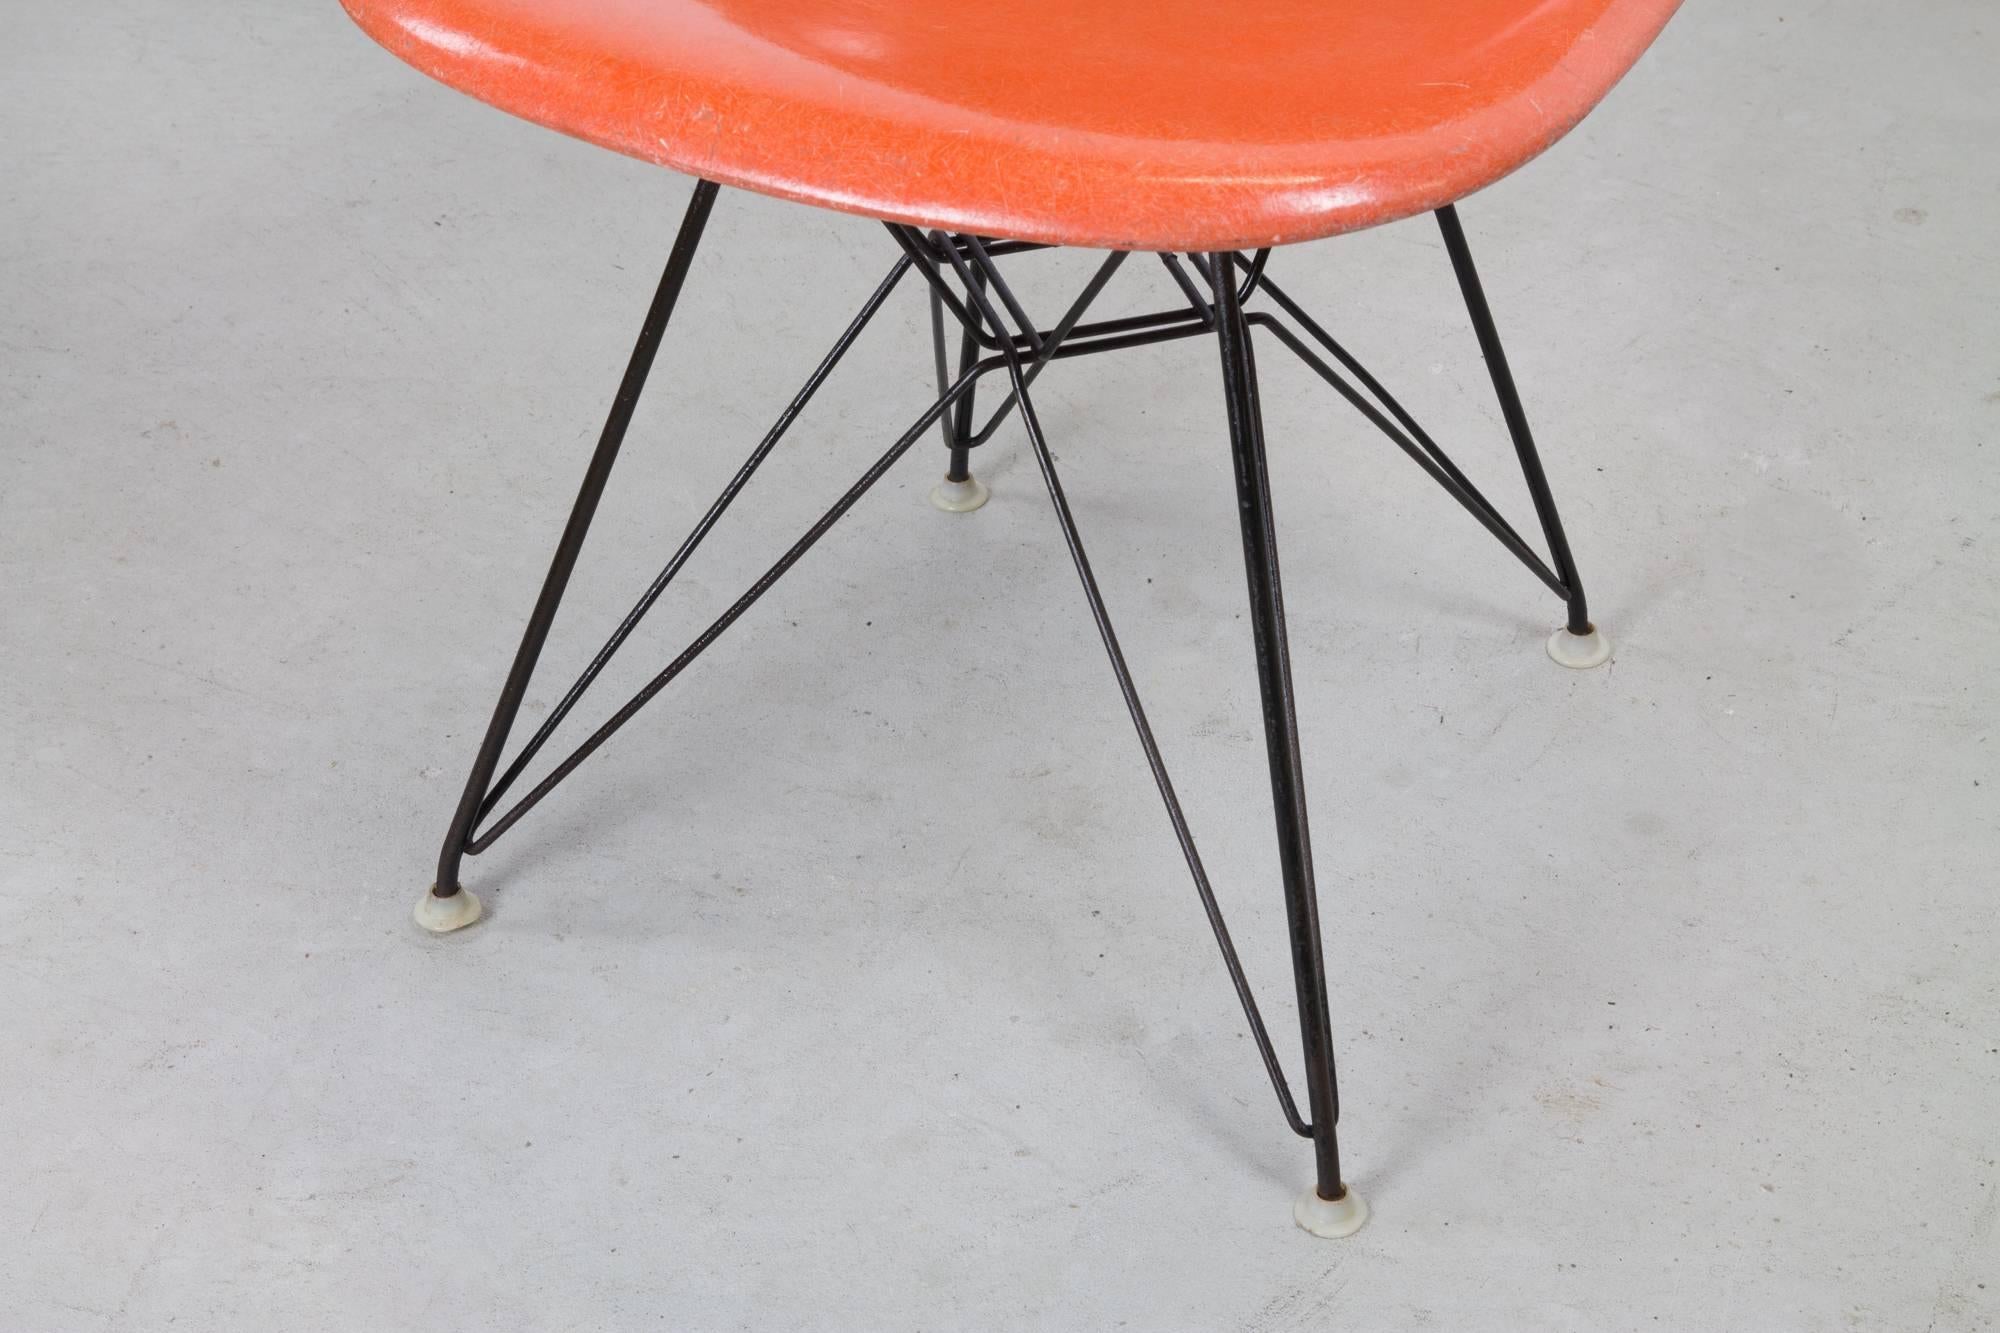 Herman Miller Eames DSR fiberglass chair on Eiffel base in rich orange. Base has excellent patina and original glides and shock mounts.